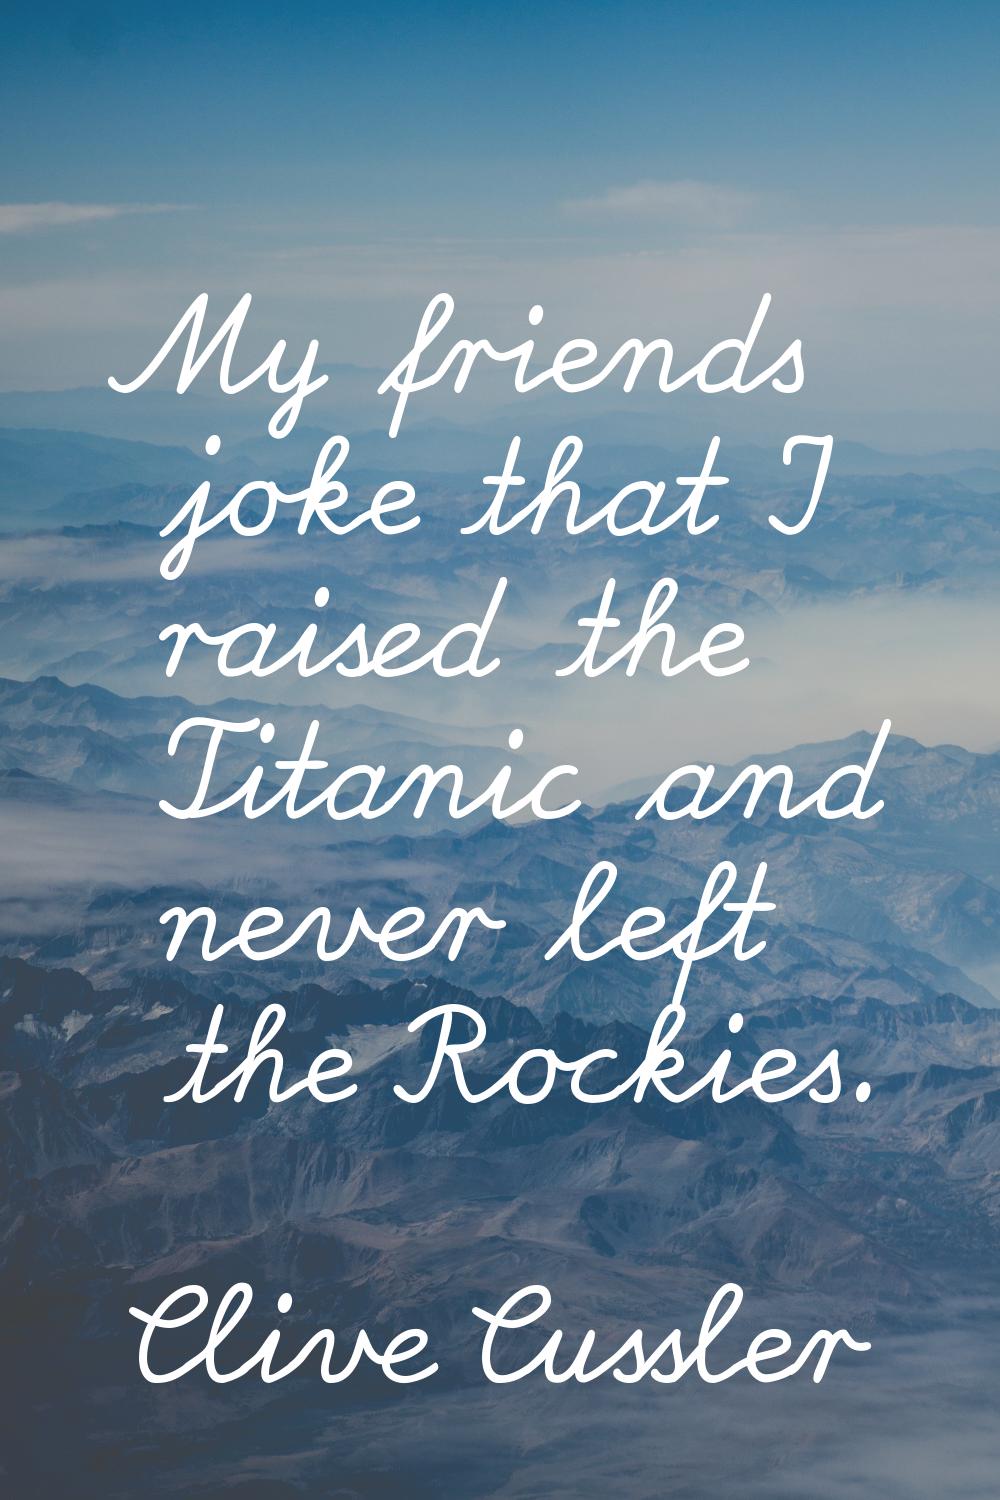 My friends joke that I raised the Titanic and never left the Rockies.